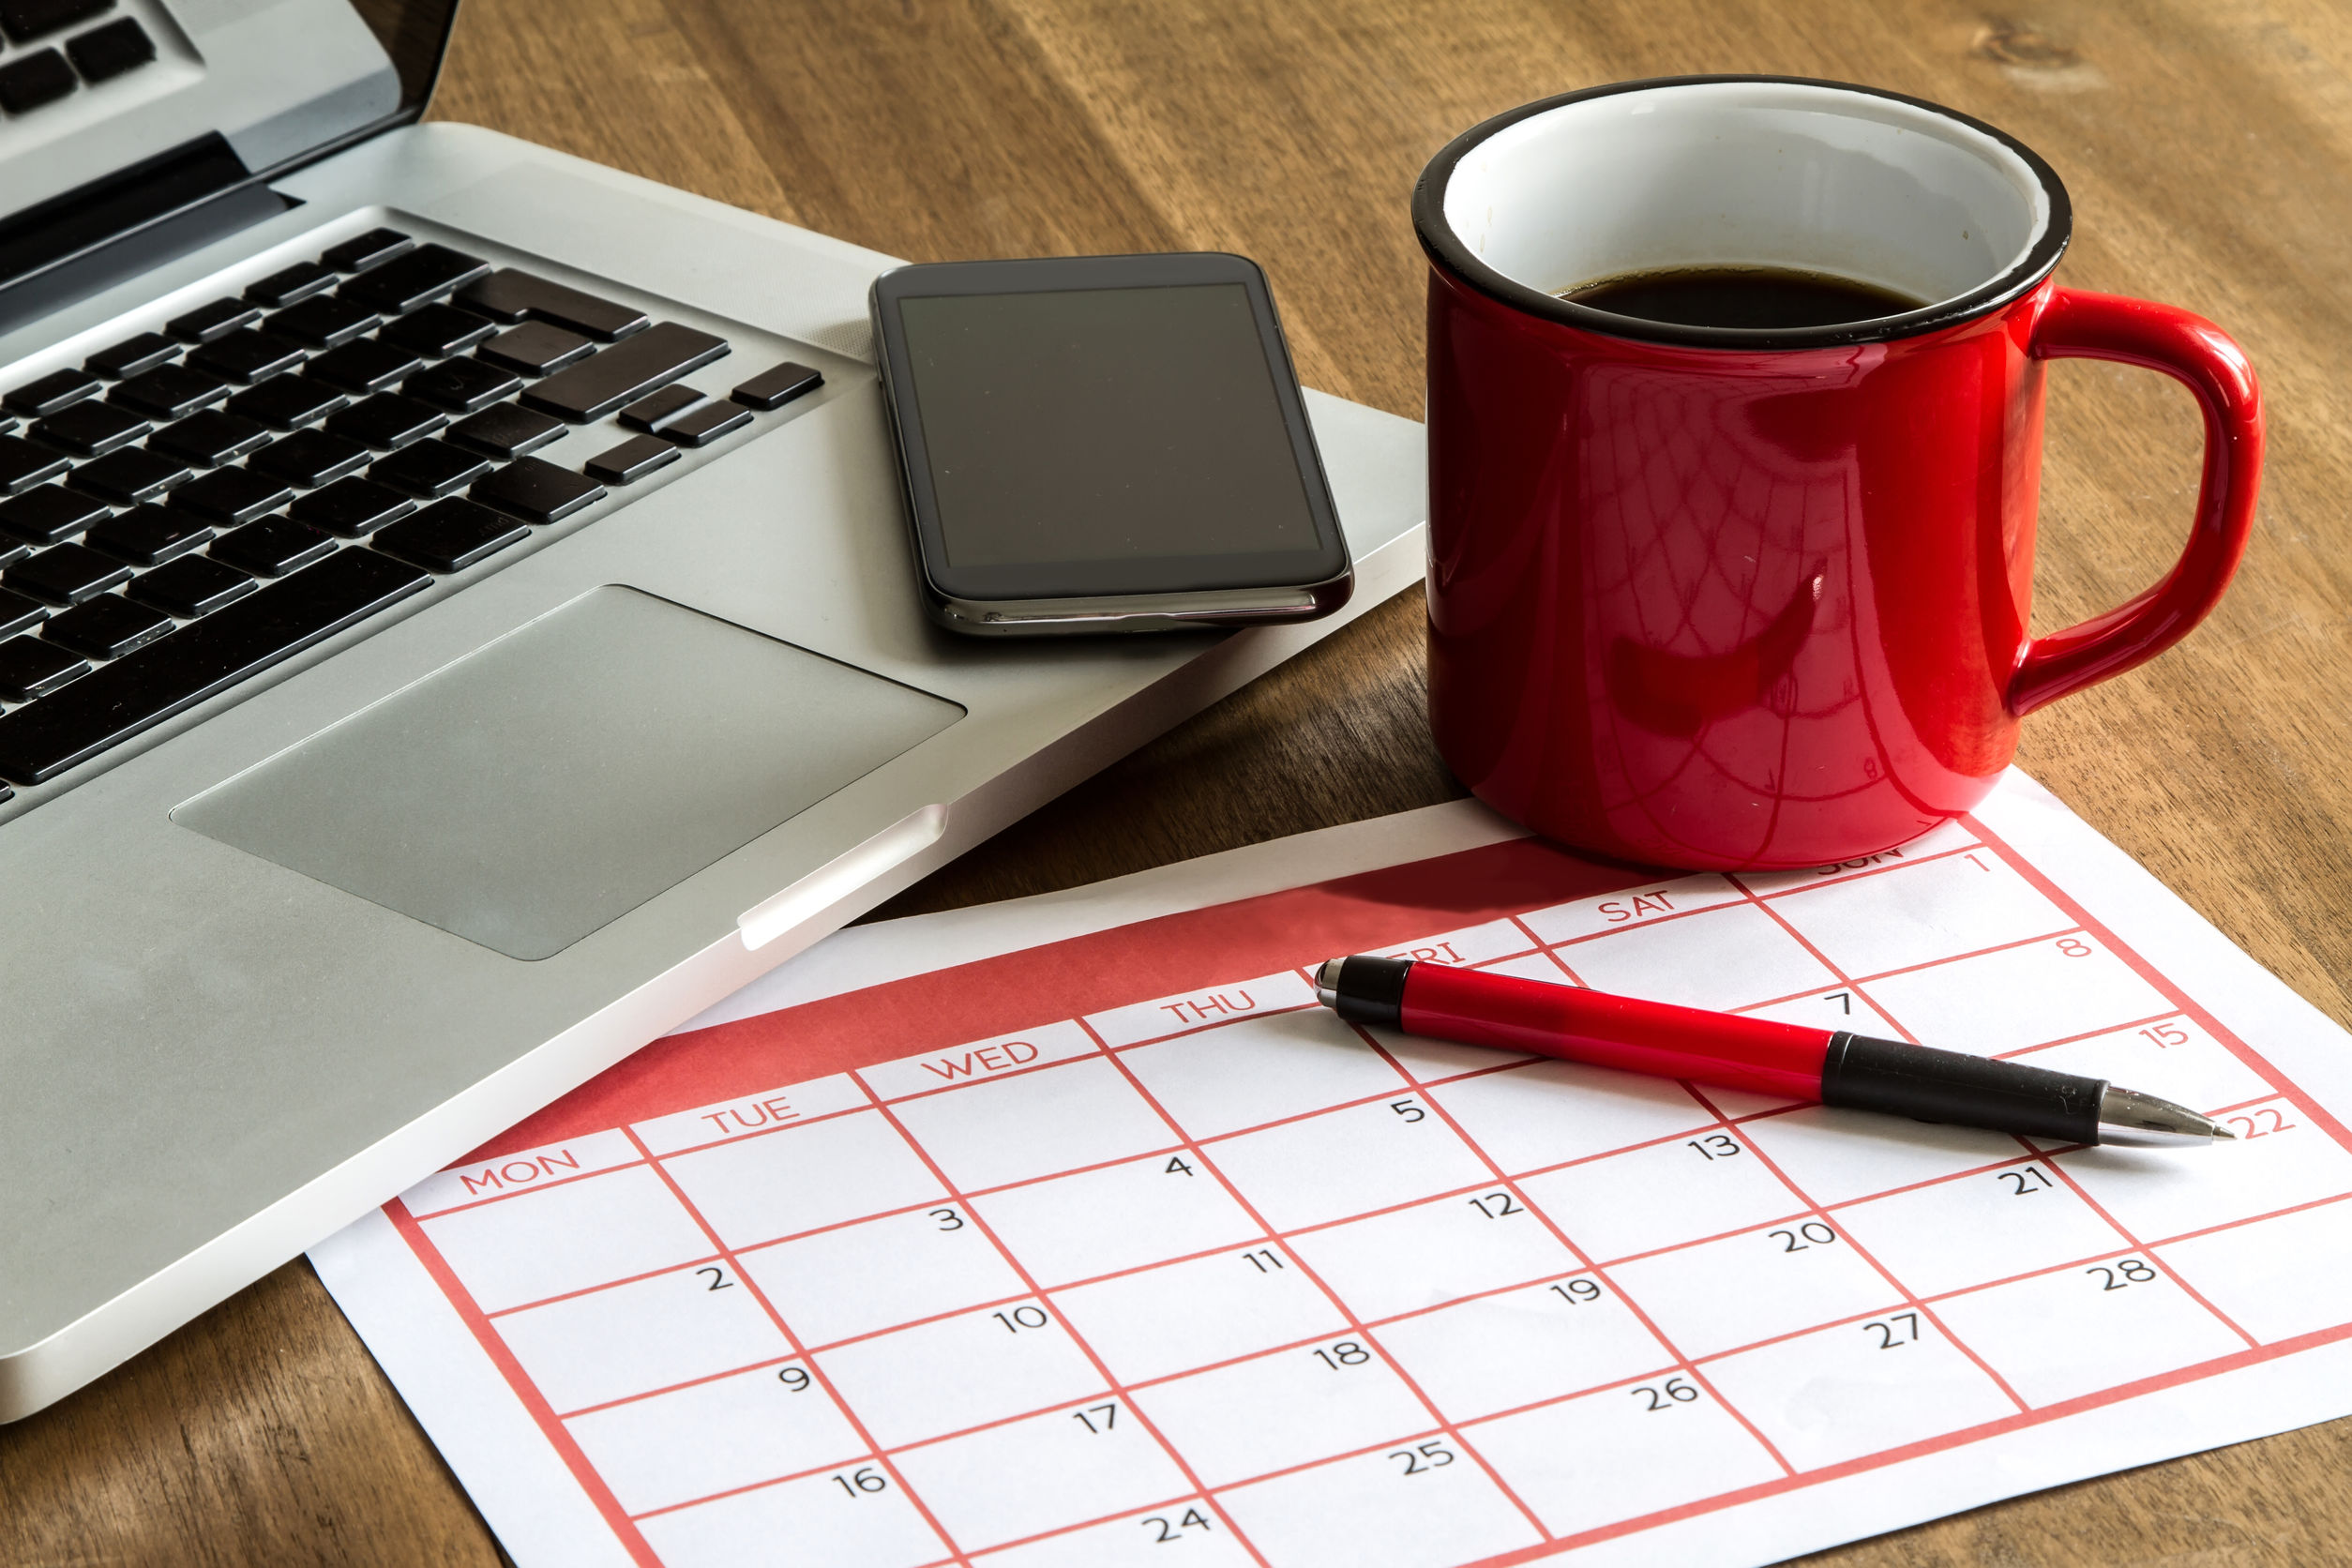 A picture of a calendar next to a laptop, smartphone and cup of coffee